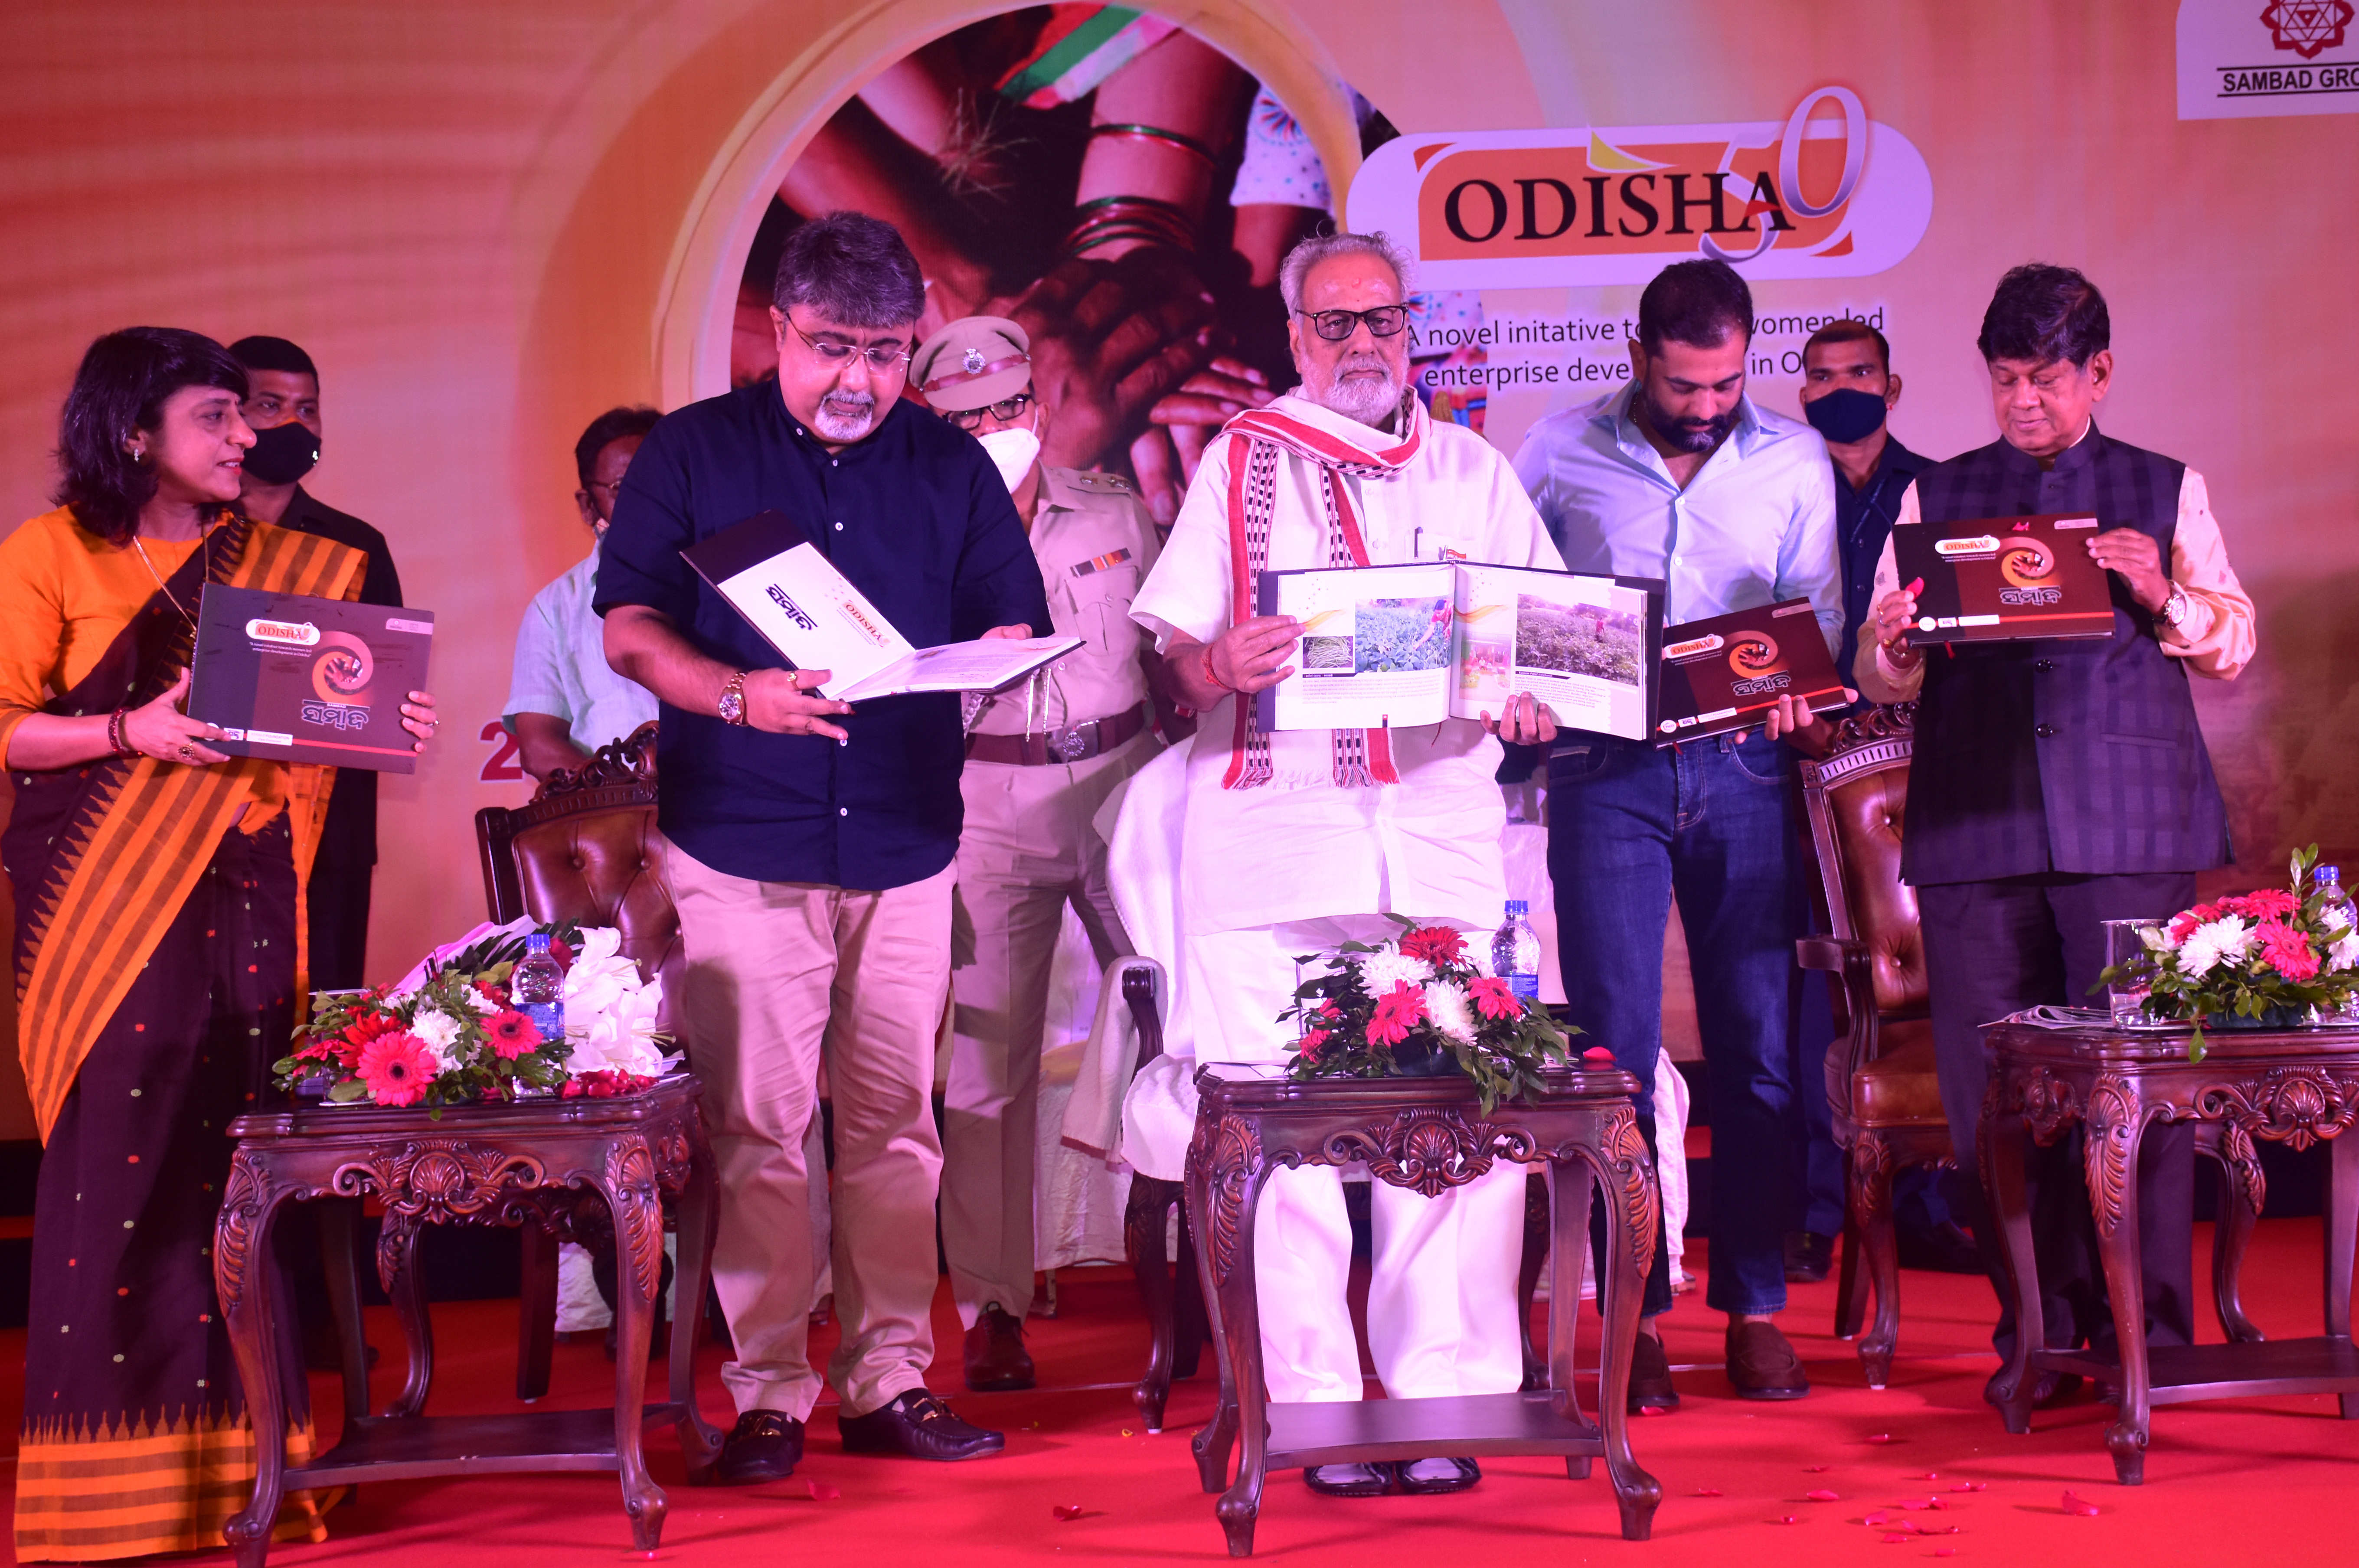 Hon'ble Governor Prof Ganeshi Lal speaking in valedictory function of Odisha 50 organised by FICCI and SAMBAD at Bhubaneswar on 25.11.2021